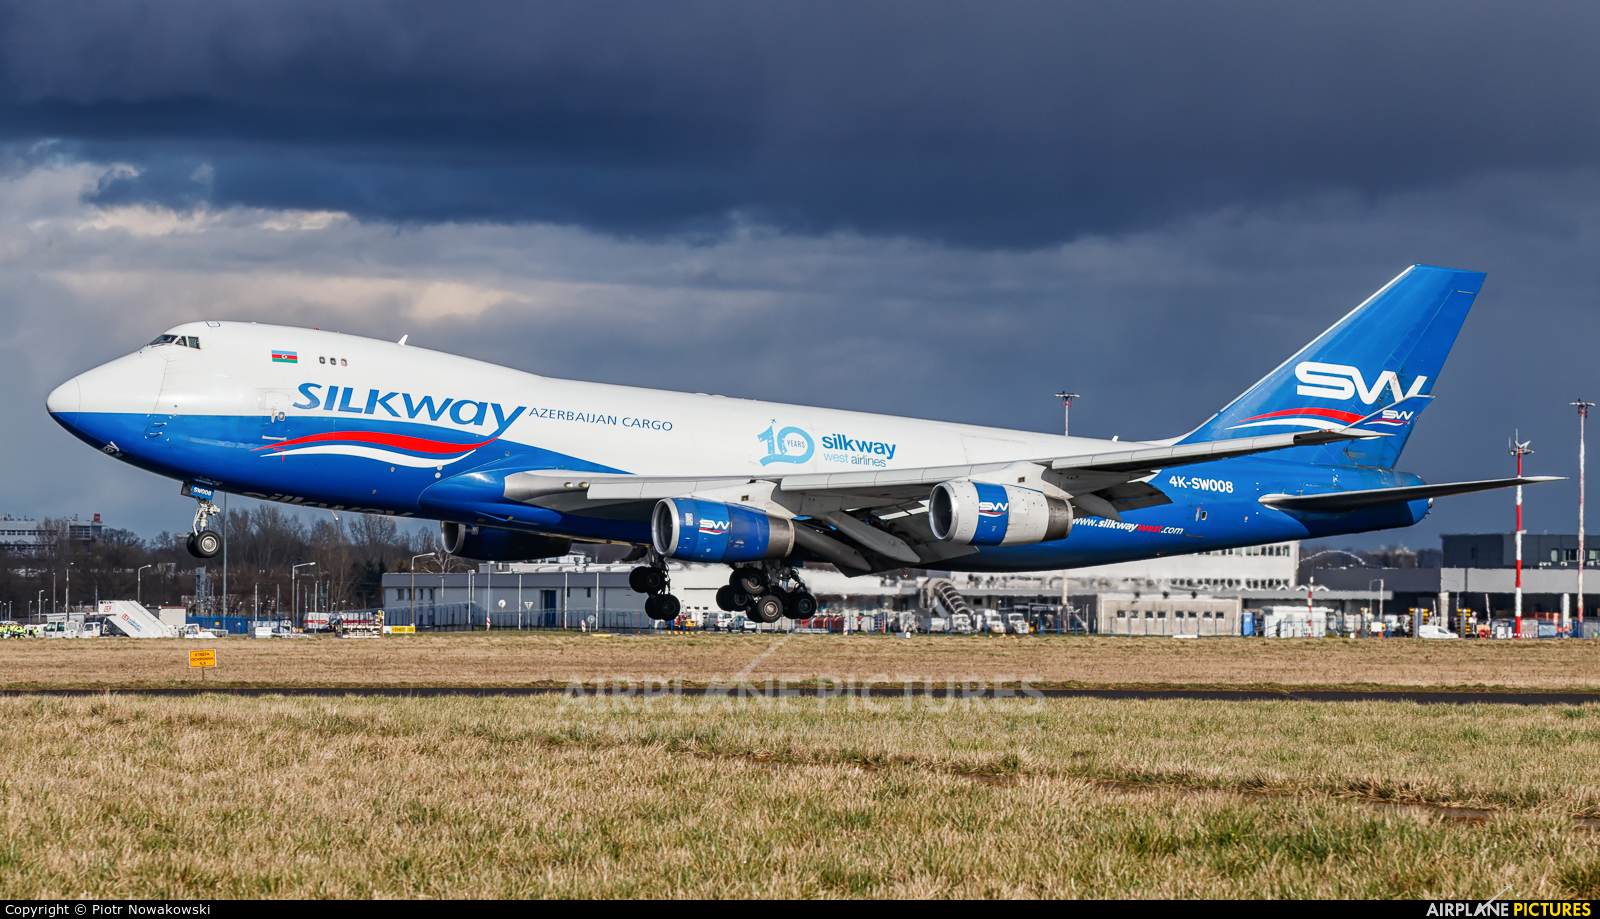 Silk Way Airlines 4K-SW008 aircraft at Warsaw - Frederic Chopin